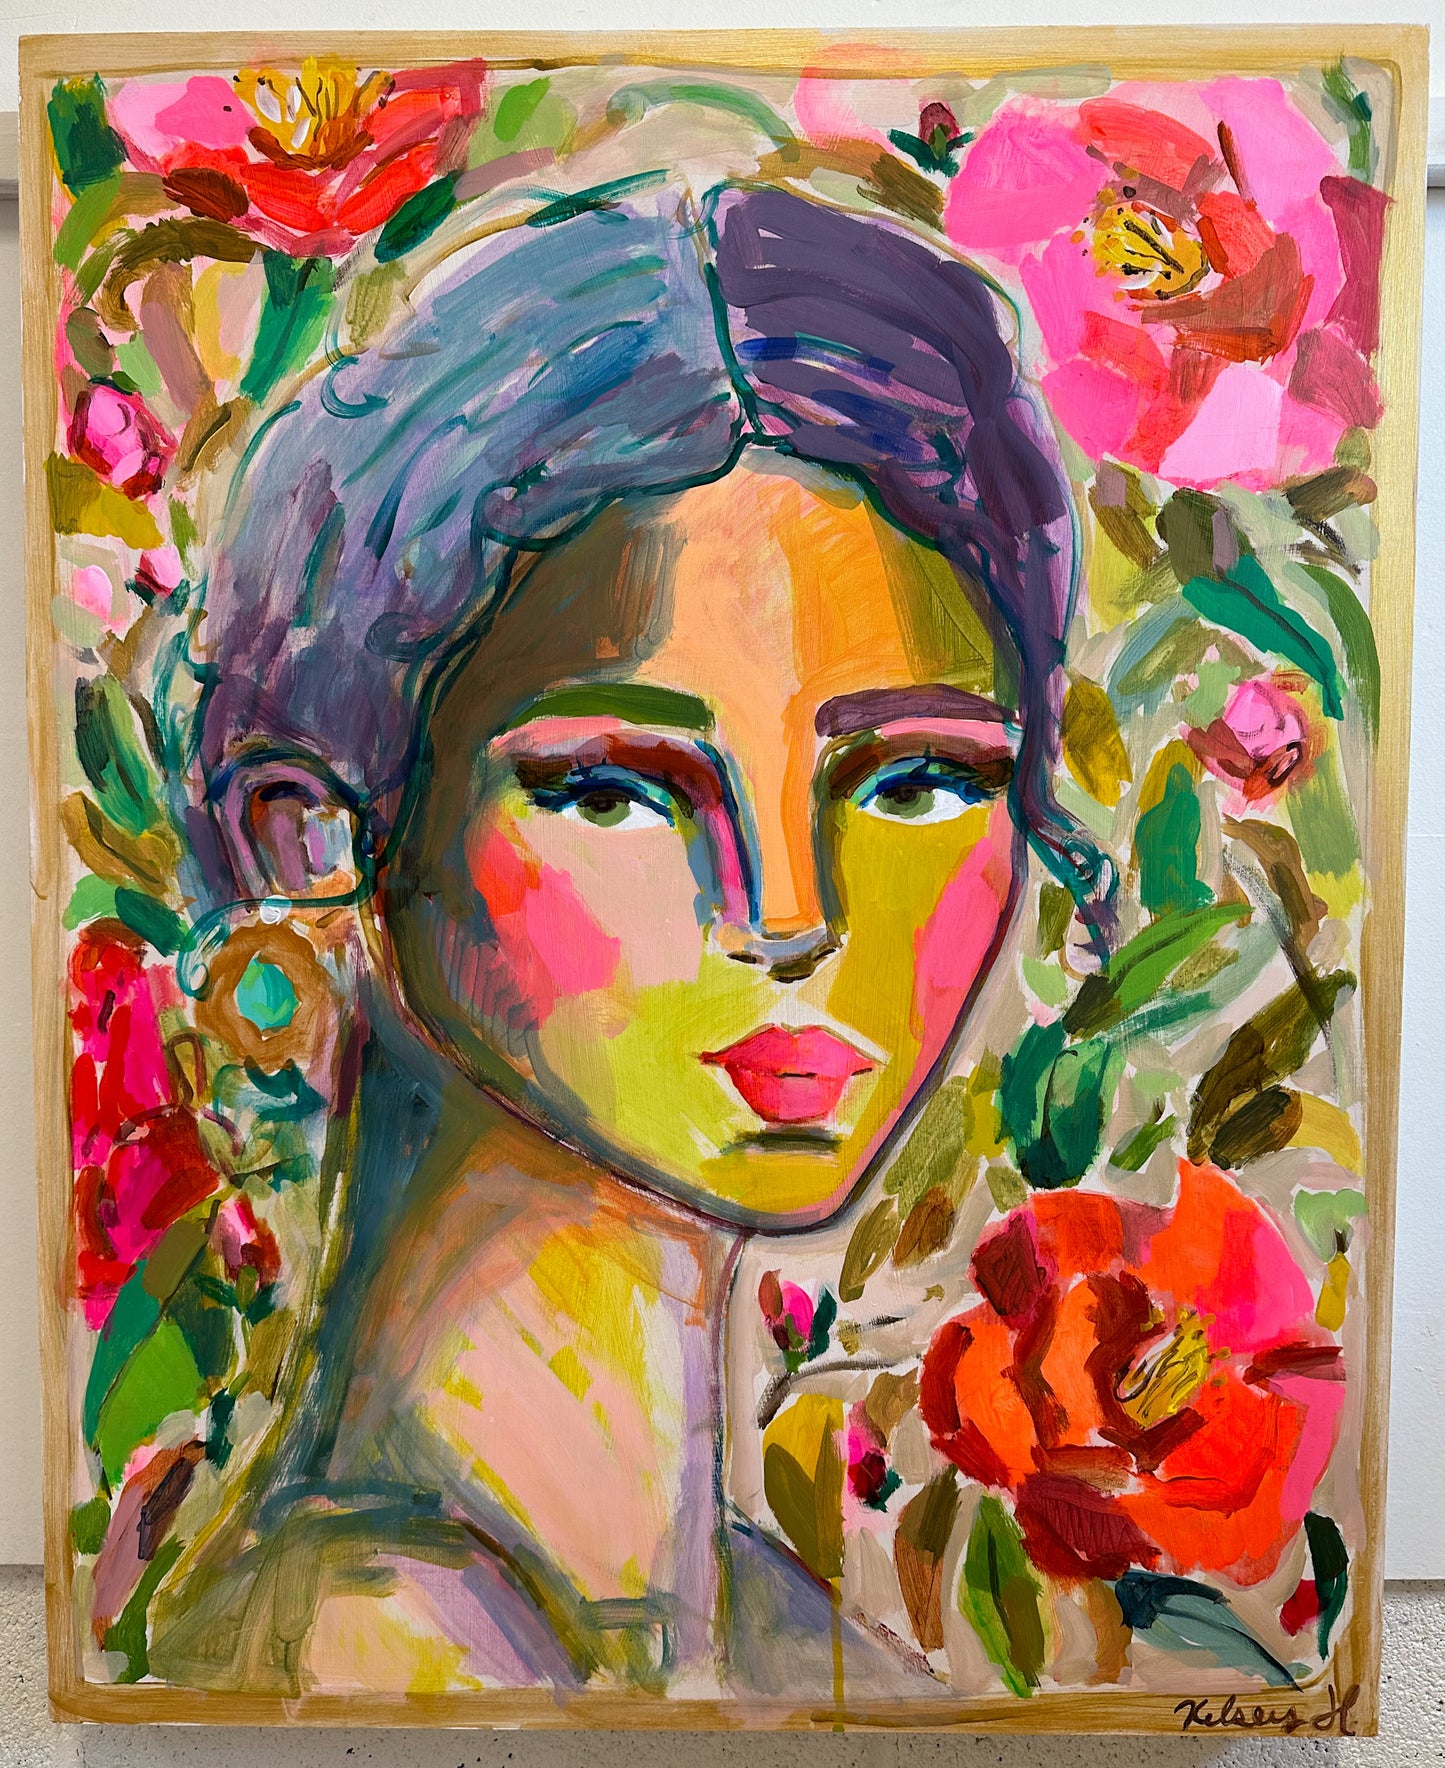 In the garden of pink and red camellias-24x30"